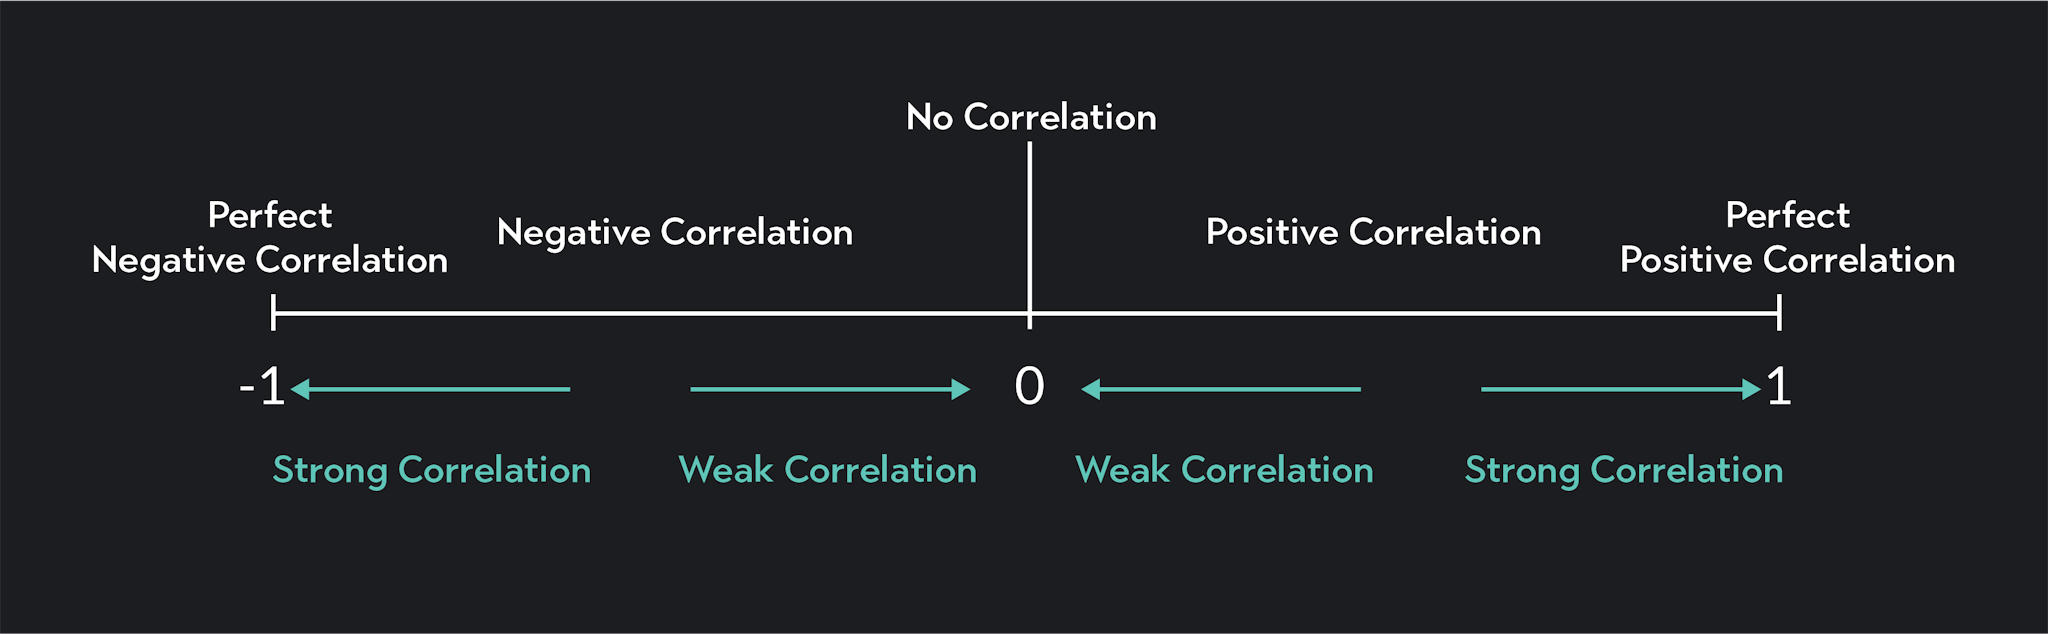 Line graph showing perfect negative correlation, negative correlation, no correlation, positive correlation, and perfect positive correlation